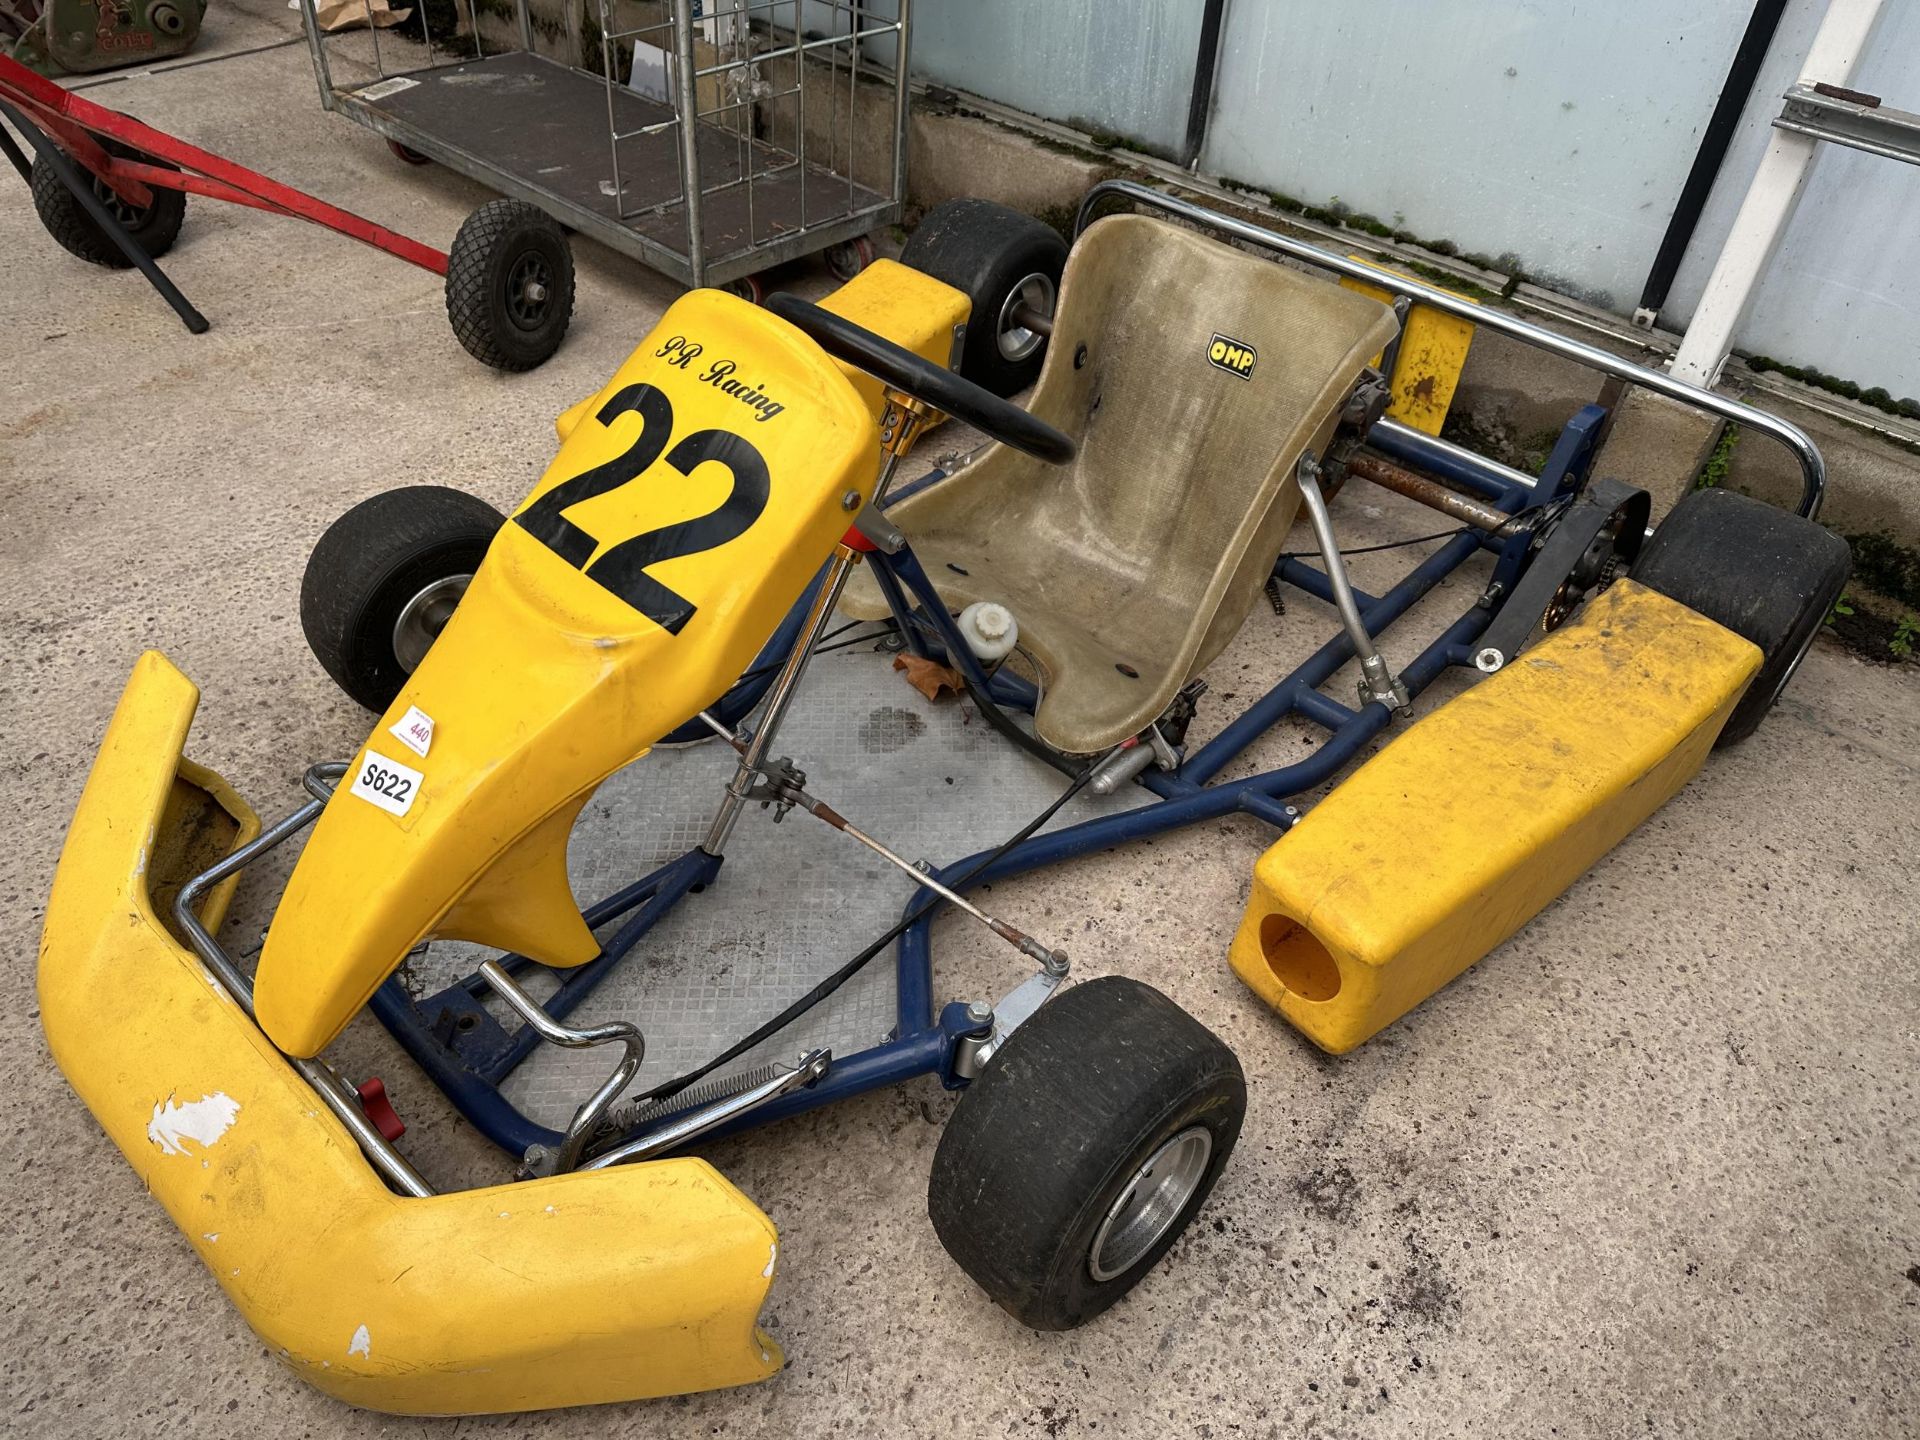 GO KART,2 HONDA ENGINES, SPARE WHEELS ETC. AND TROLLEY NO VAT - Image 6 of 8